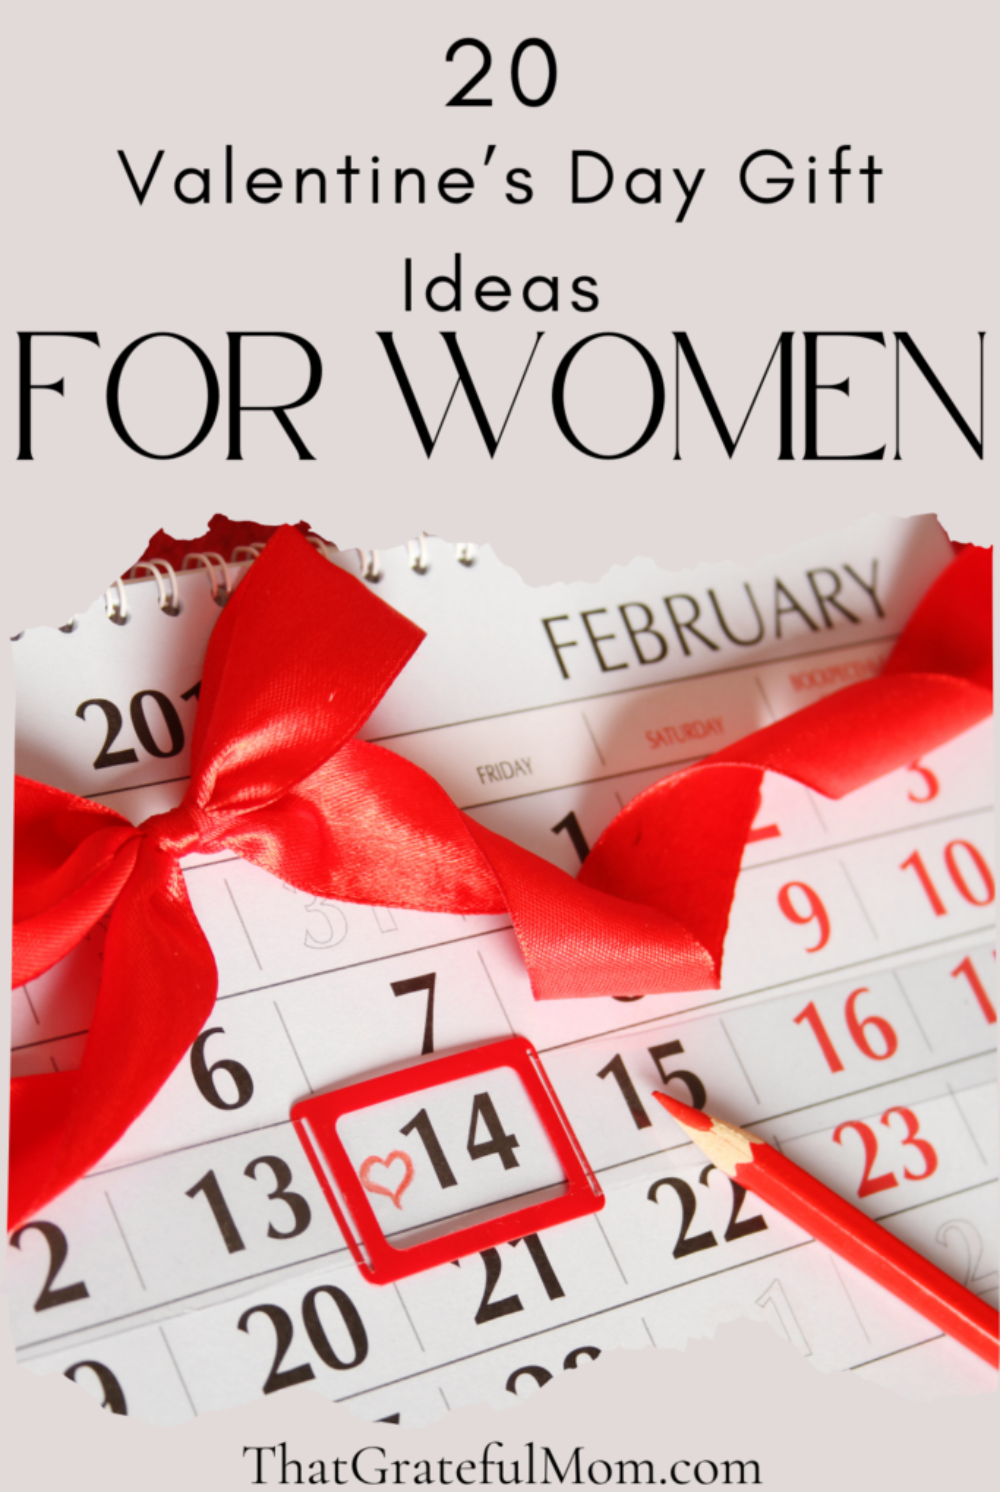 Valentine's Day gift ideas for women pin 3